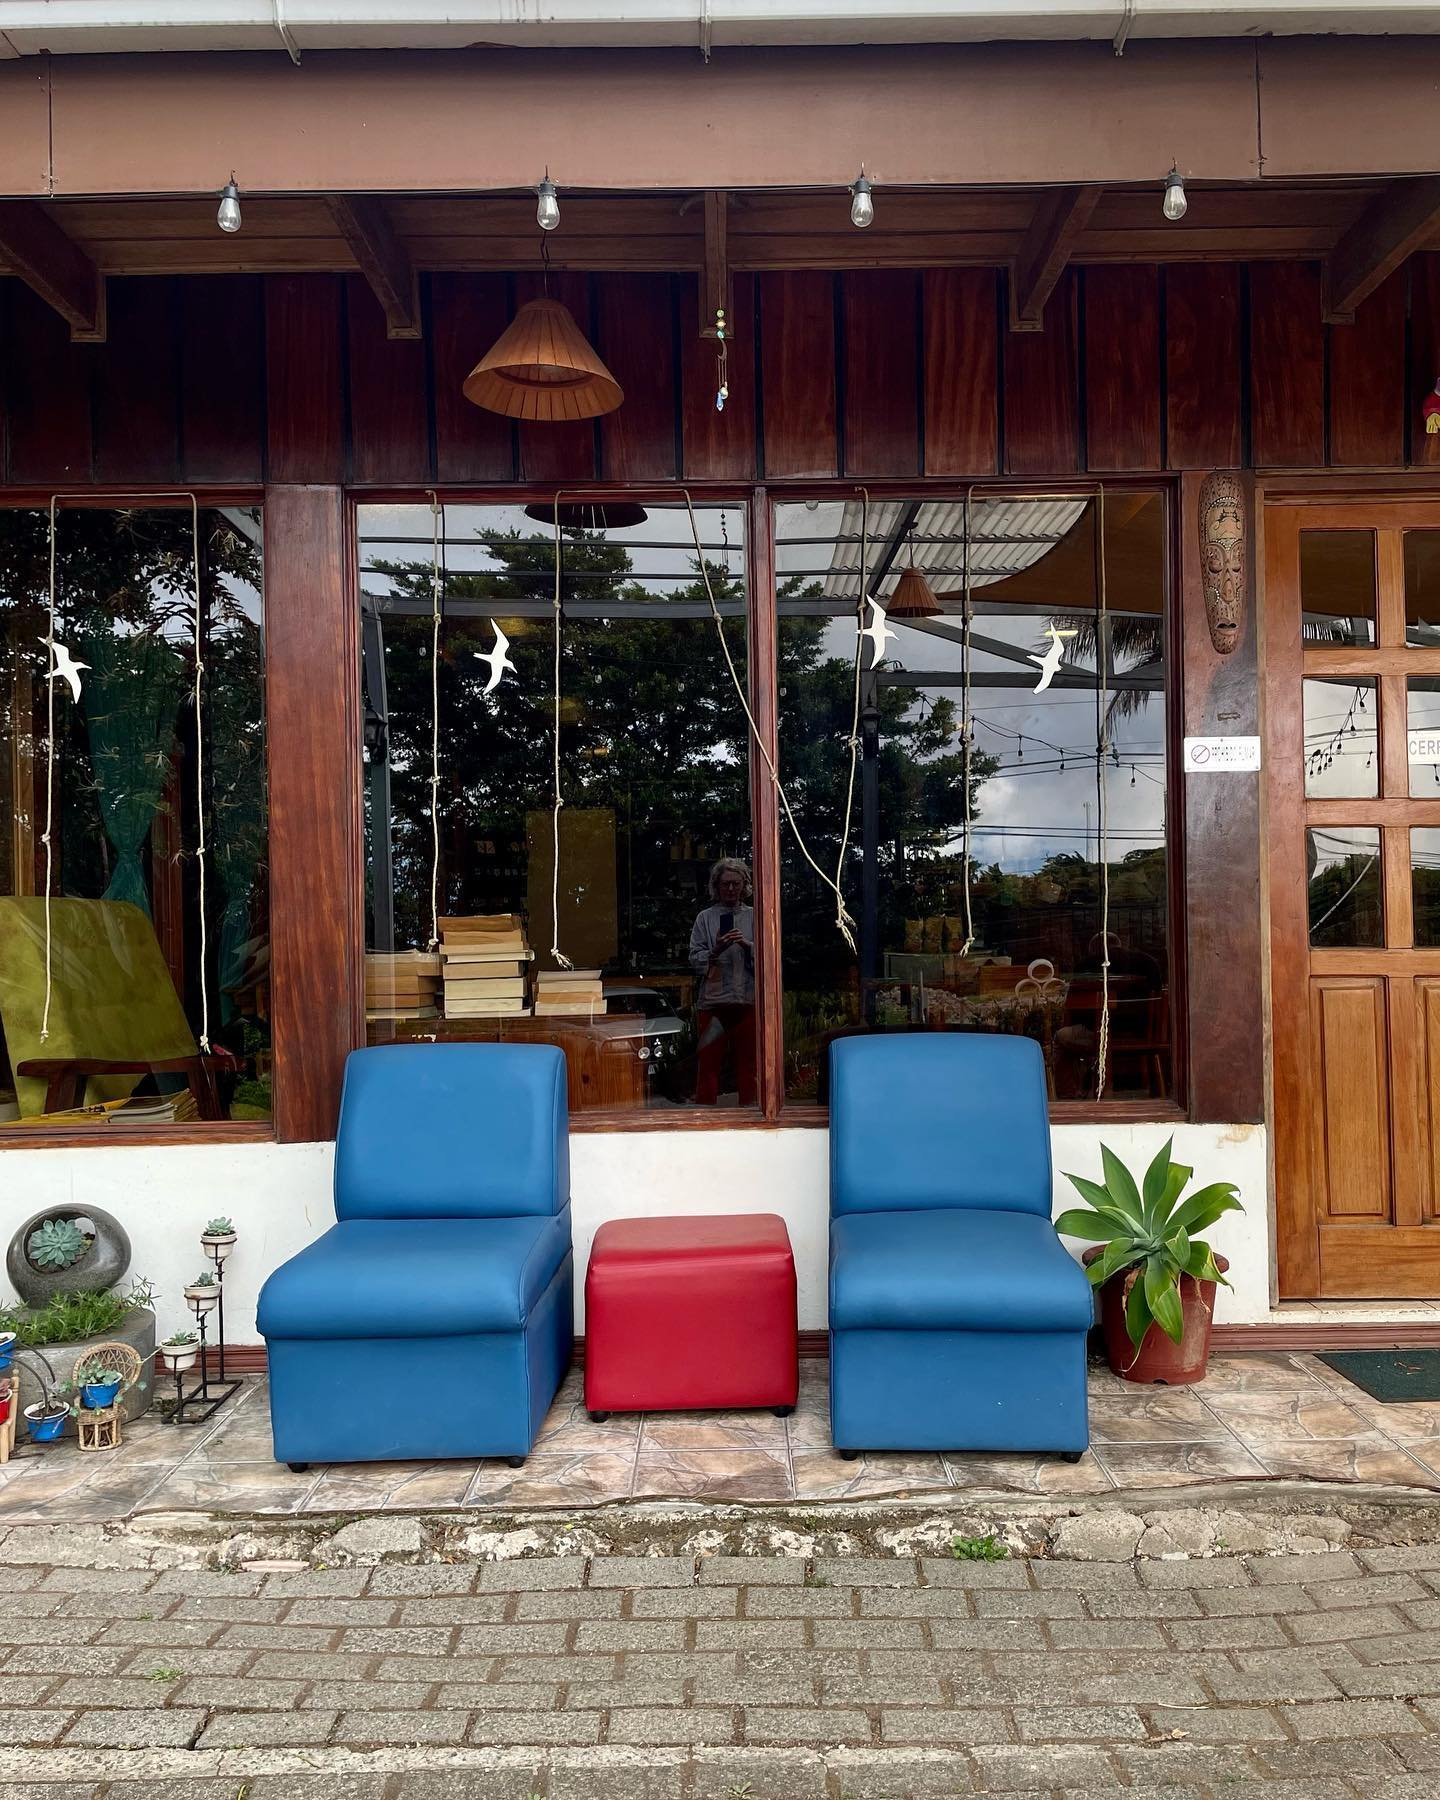 Casa.

Things I&rsquo;m liking whilst travelling in Central America.
.
.
.
#costarica #centralamerica #midcenturyamerica